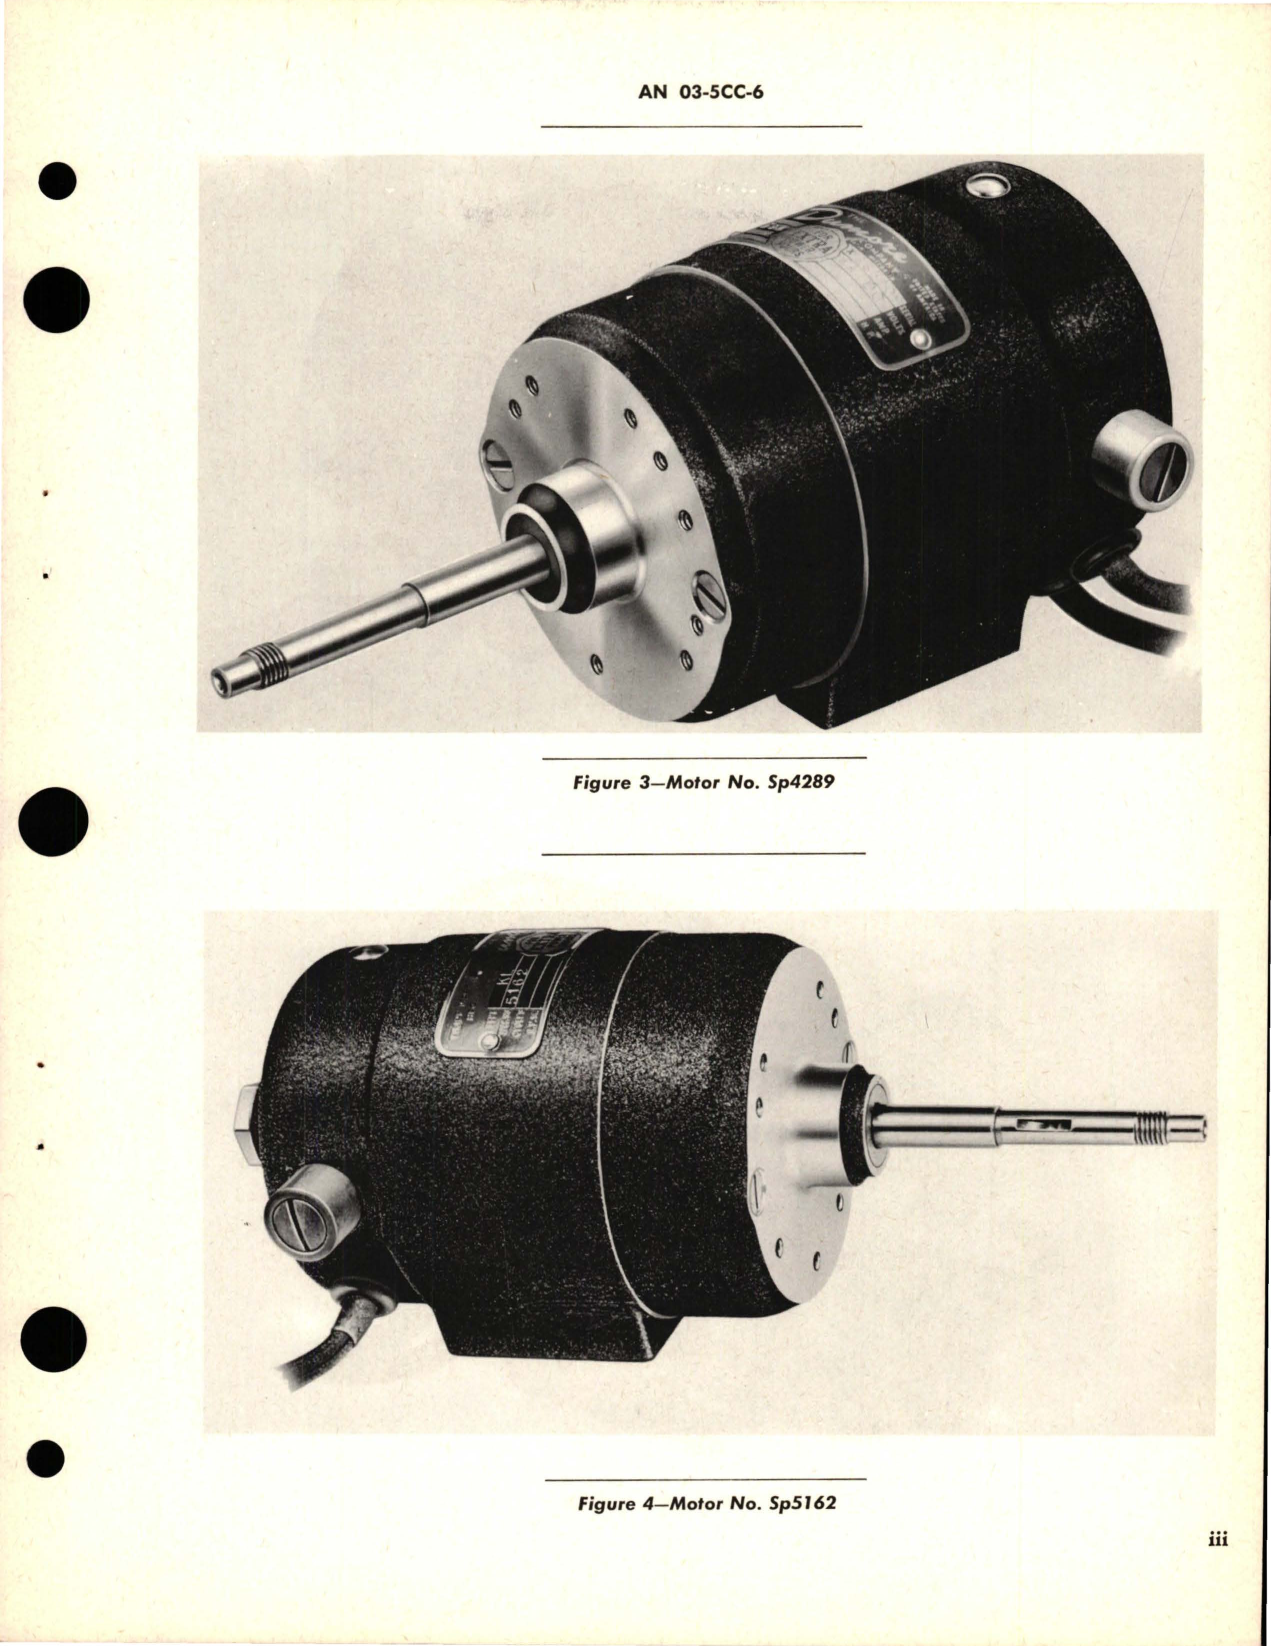 Sample page 5 from AirCorps Library document: Operation, Service, and Overhaul Instructions with Parts Catalog for Fractional Horsepower Electric Motors